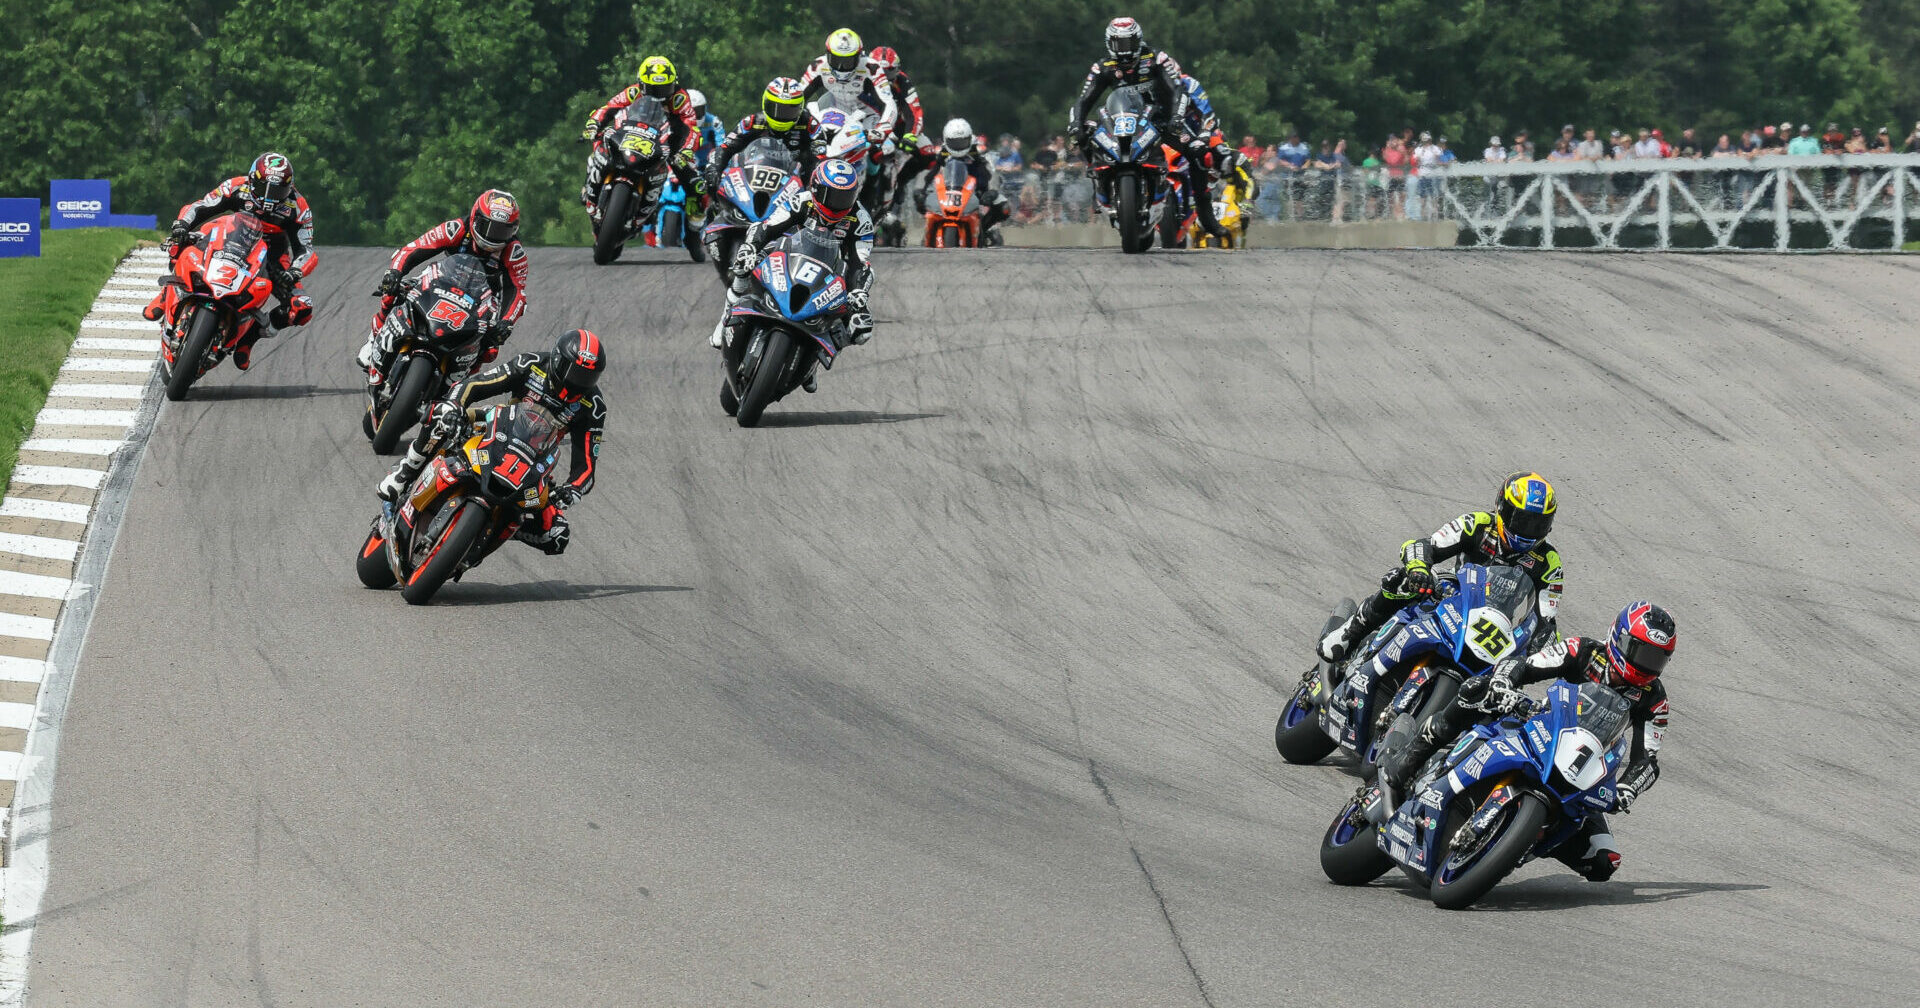 Jake Gagne (1) leads Cameron Petersen (45) into Turn Five on the opening lap of the Medallia Superbike race. Petersen would crash seconds later and Gagne would race away to victory on Sunday at Barber Motorsports Park. Photo by Brian J. Nelson, courtesy MotoAmerica.